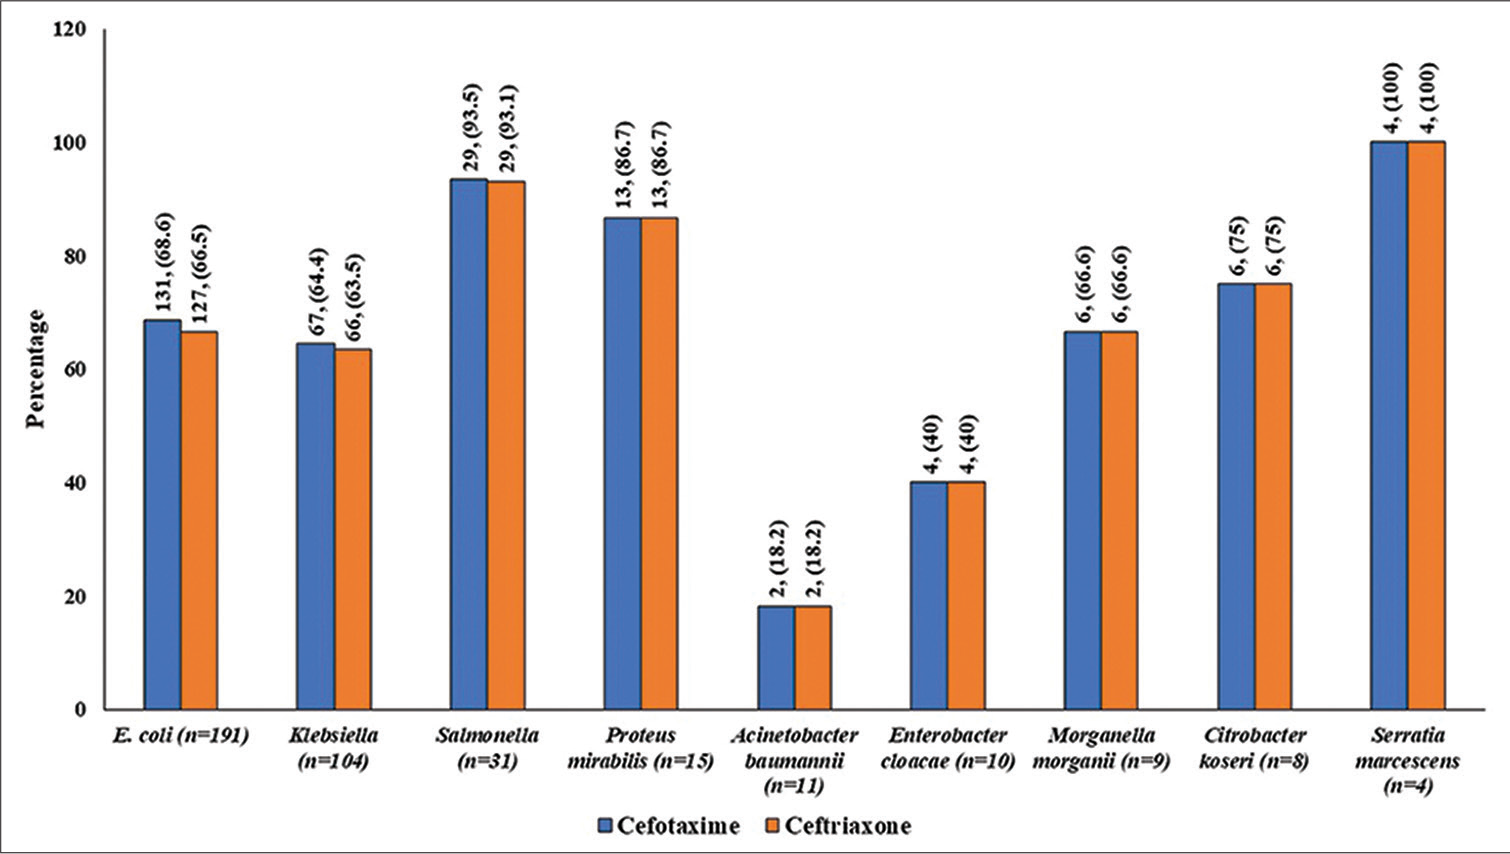 Proportion of samples sensitive for cefotaxime versus ceftriaxone as per CLSI criteria based on zone of inhibition (values are in numbers, percentage). CLSI, clinical and Laboratory Standards Institute.